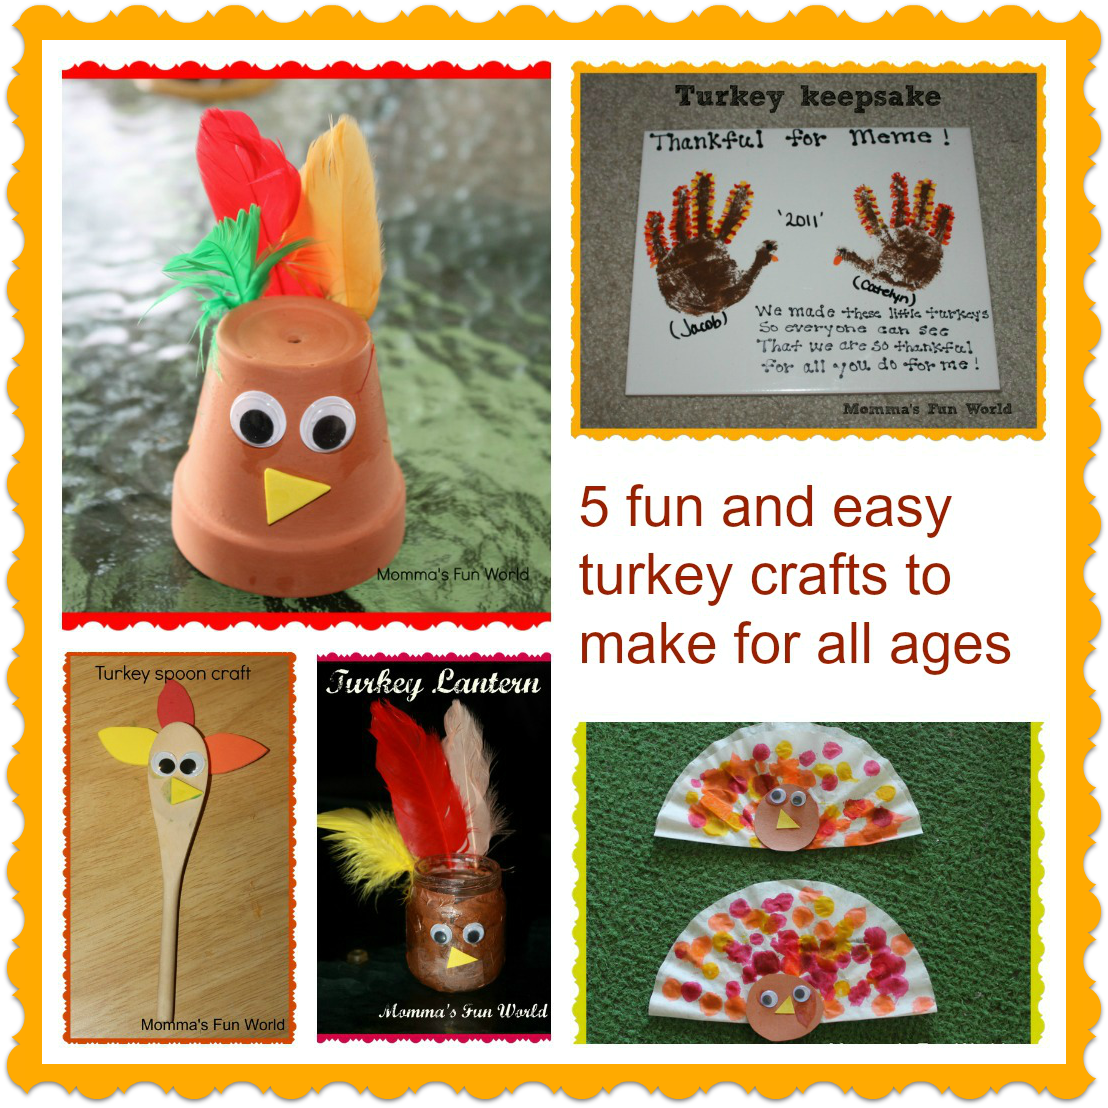 momma-s-fun-world-fun-turkey-crafts-for-all-ages